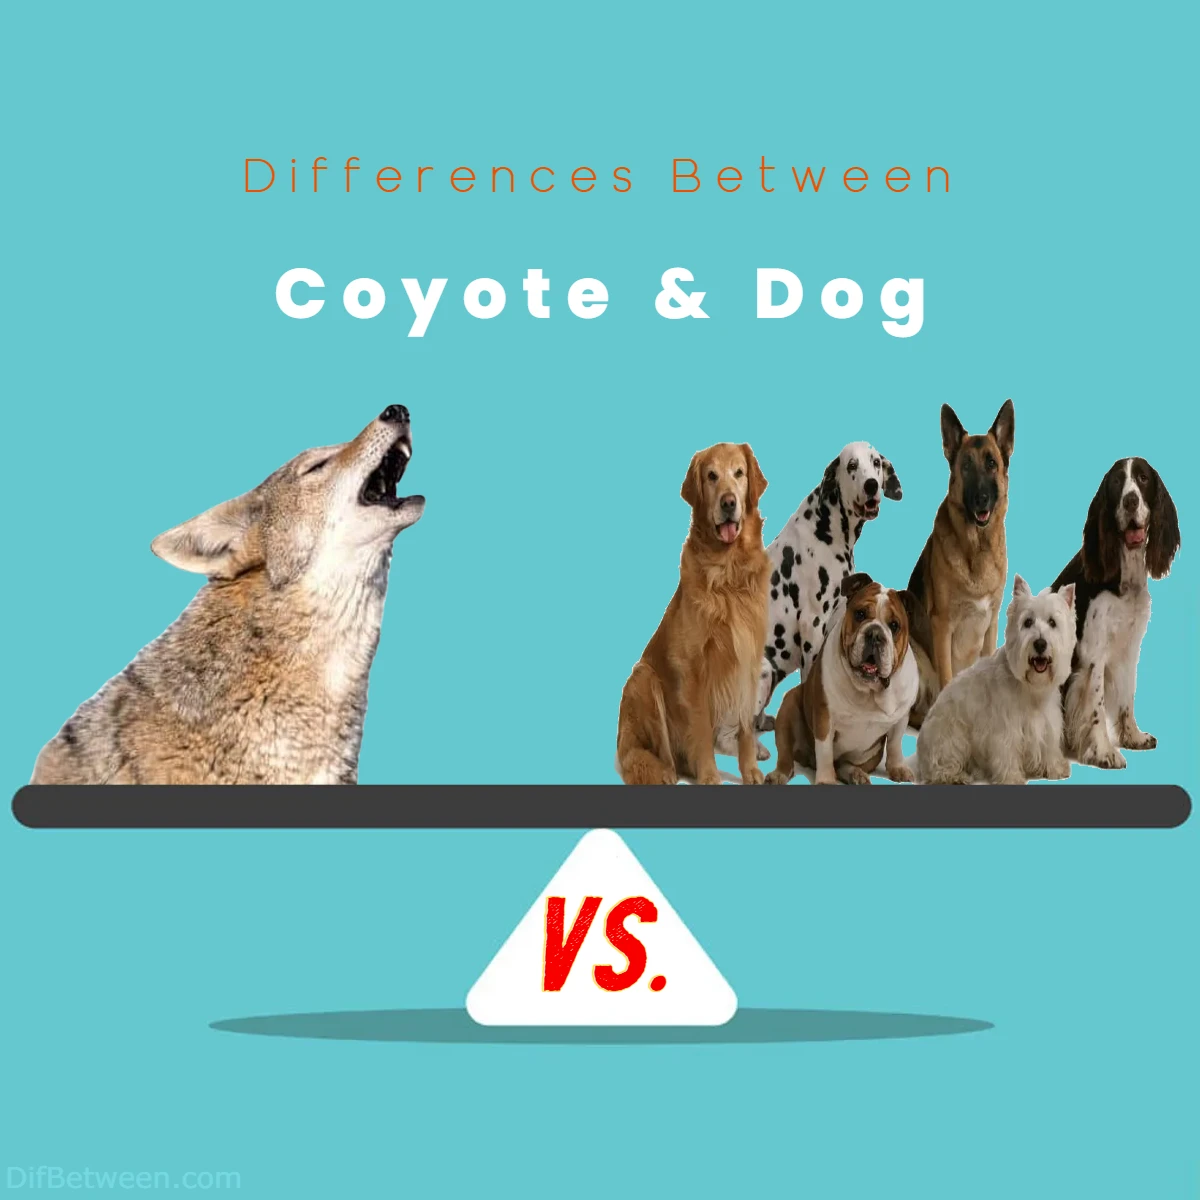 Difference Between Dog and Coyote